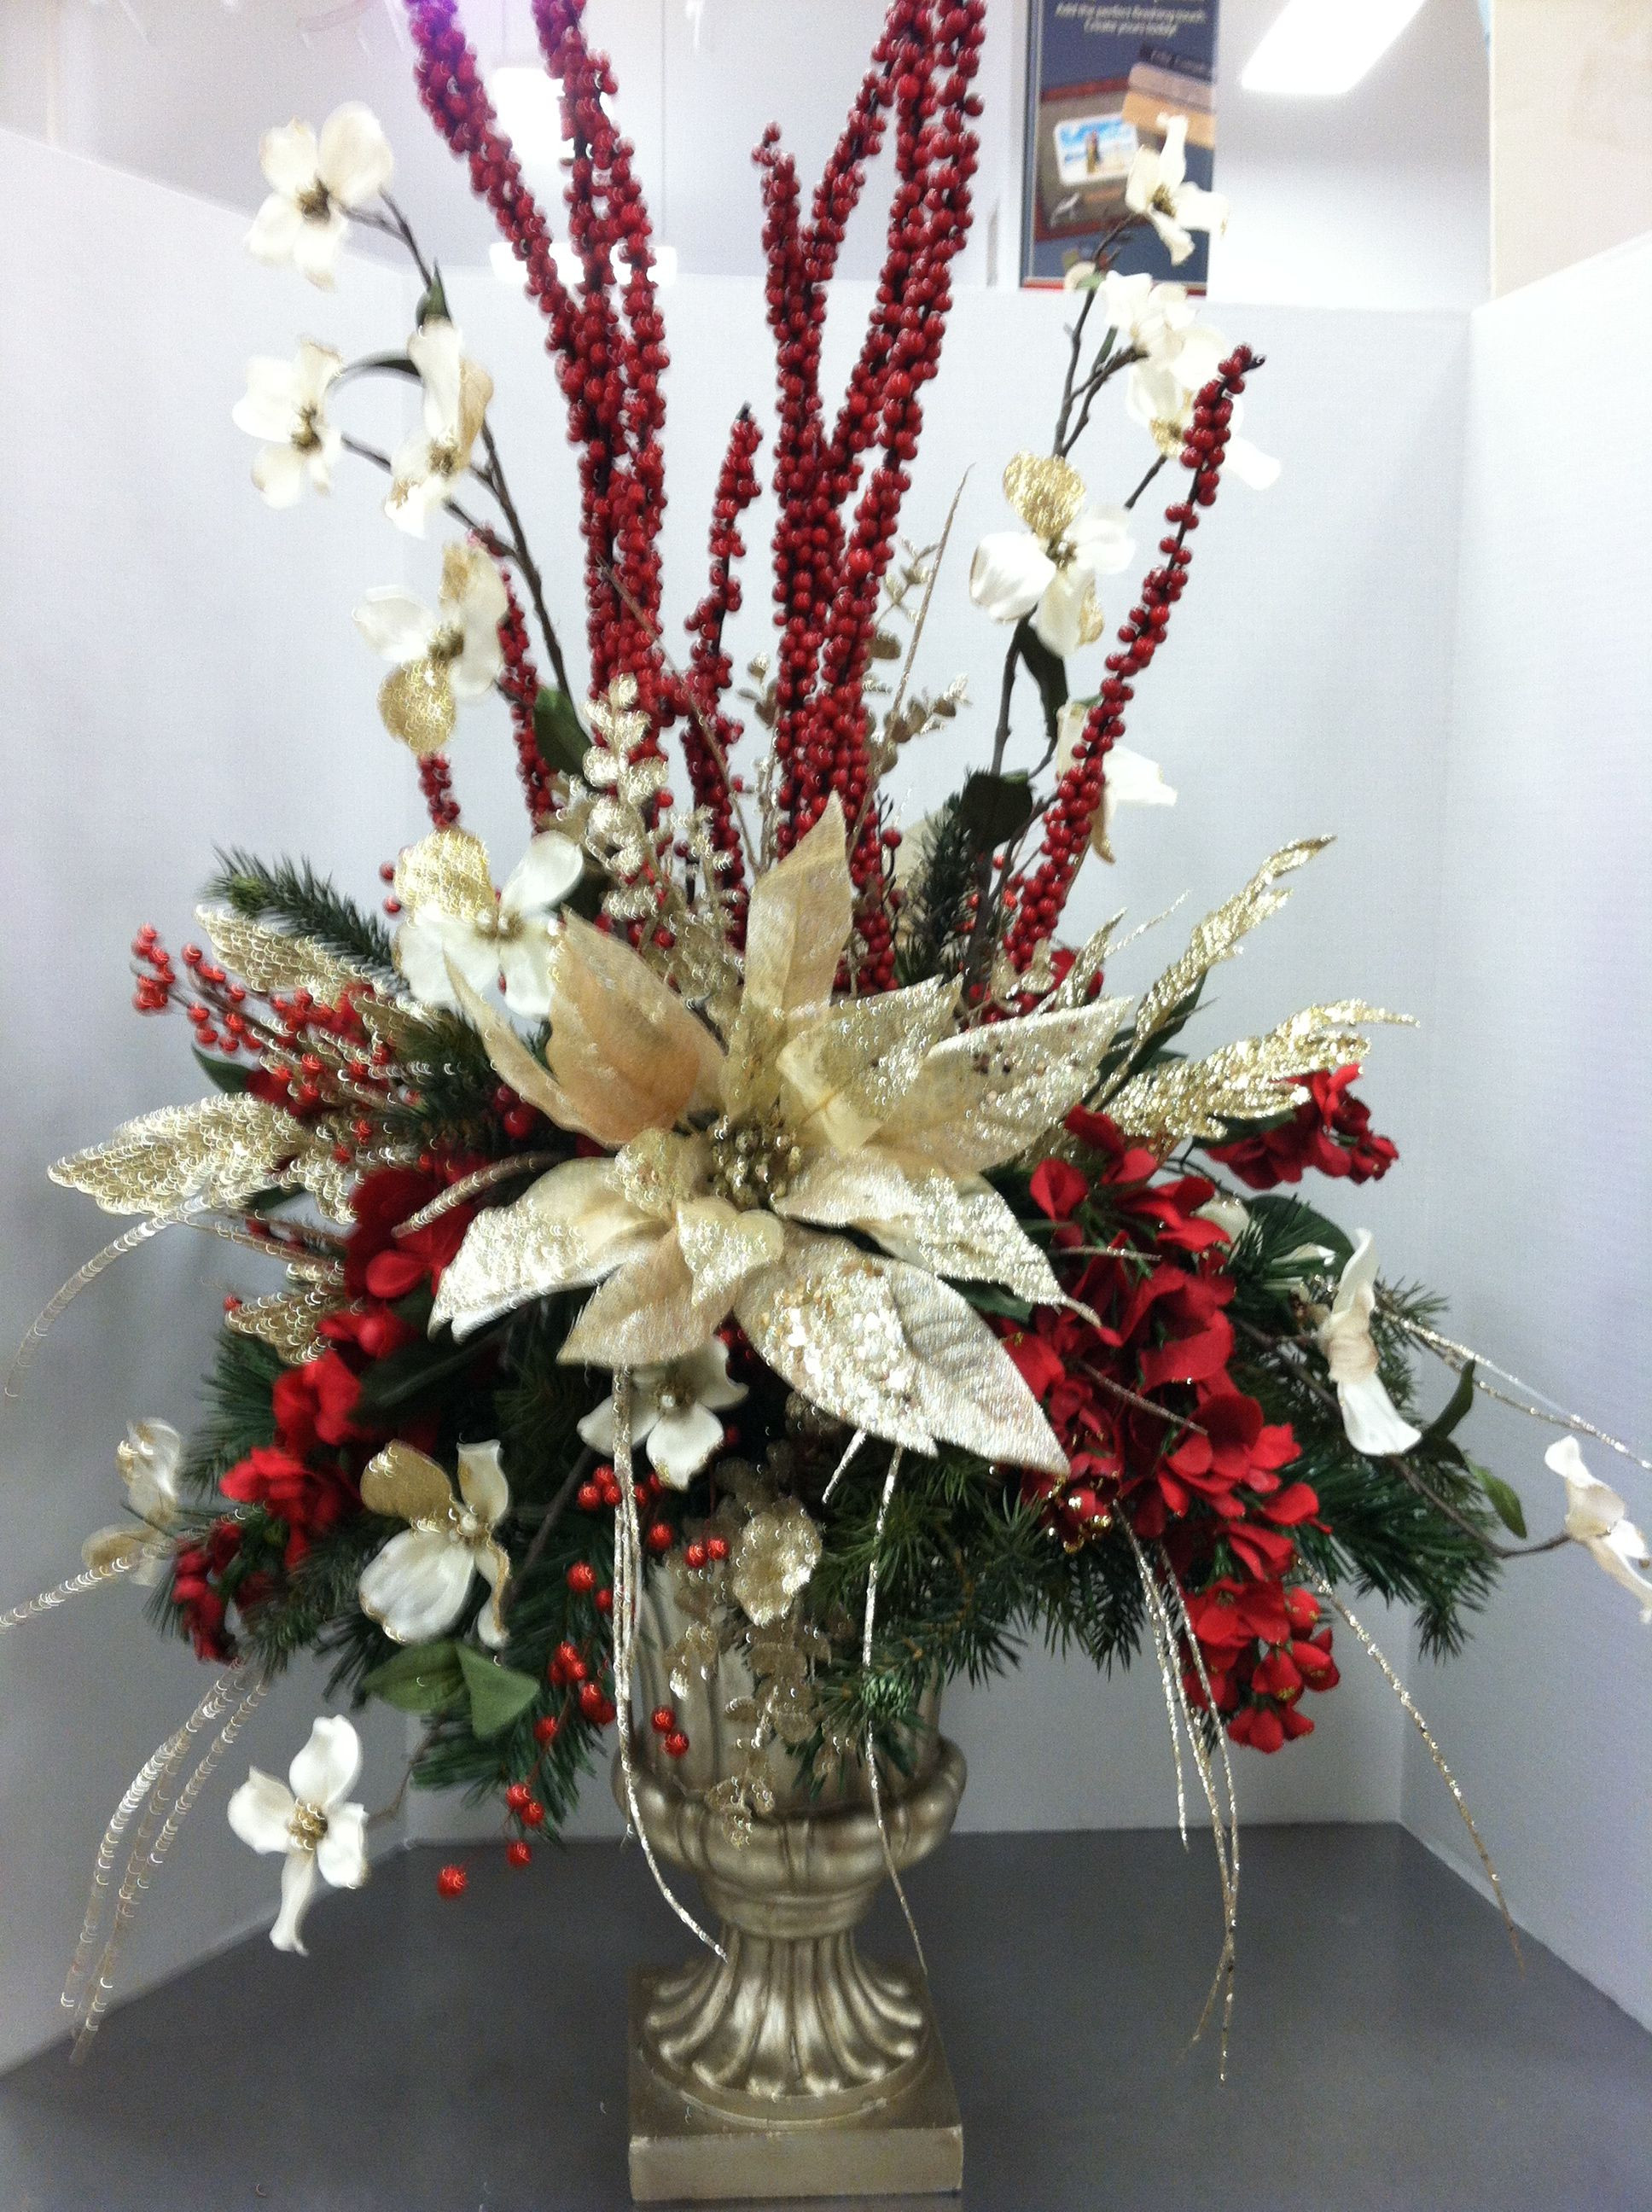 Christmas Flower Centerpieces
 Trina this would be beautiful for Christmas arrangement